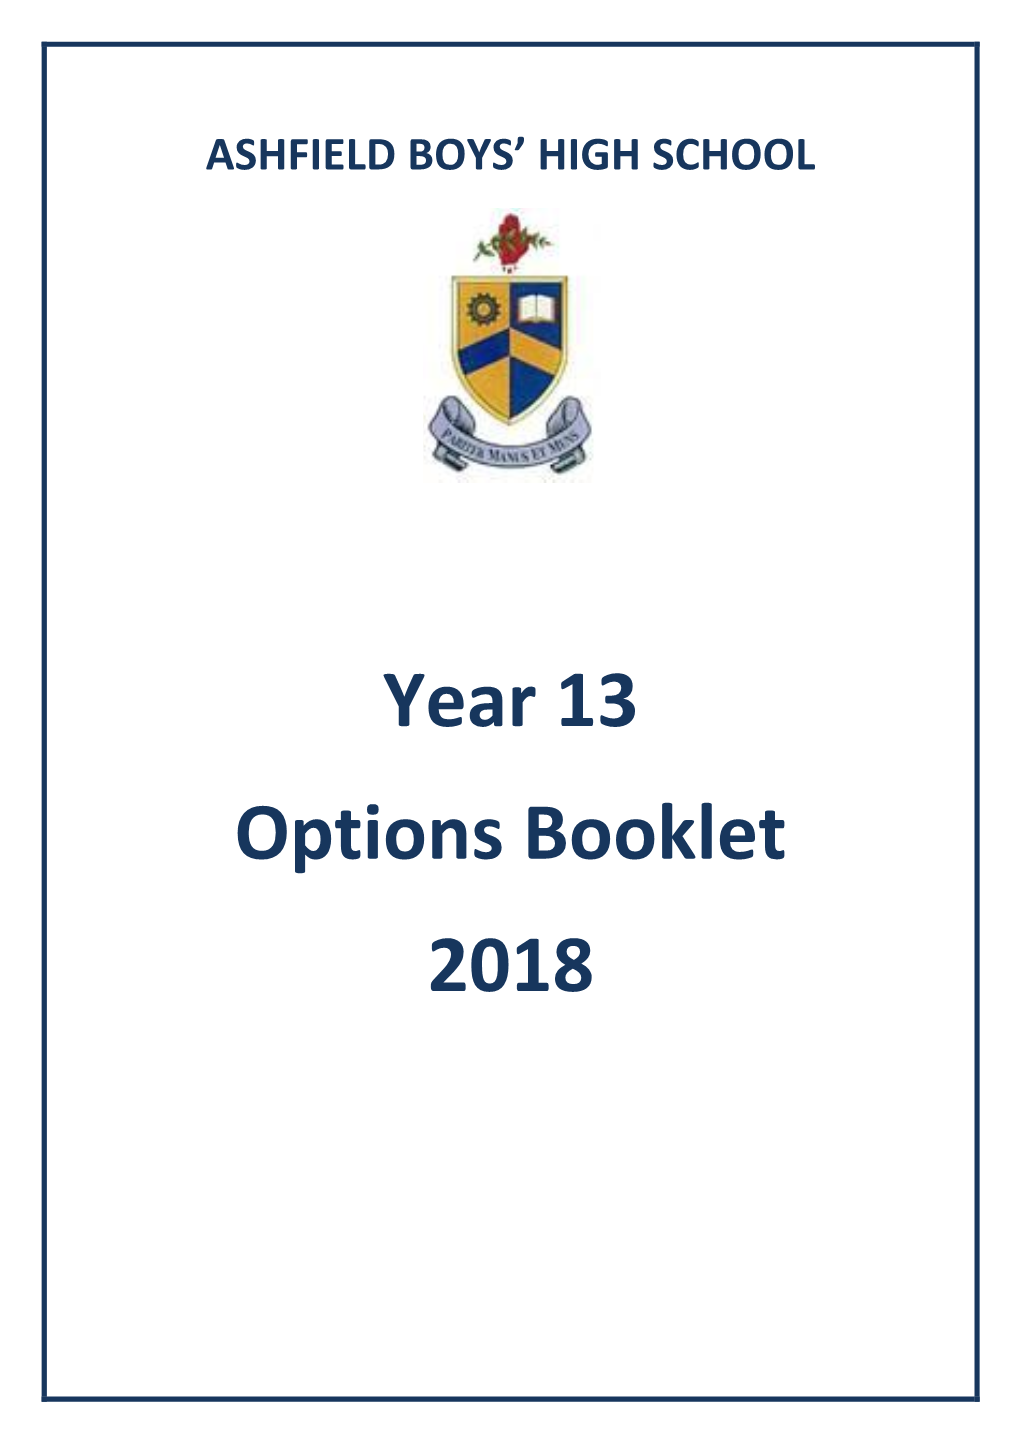 Year 13 Options Booklet 2018